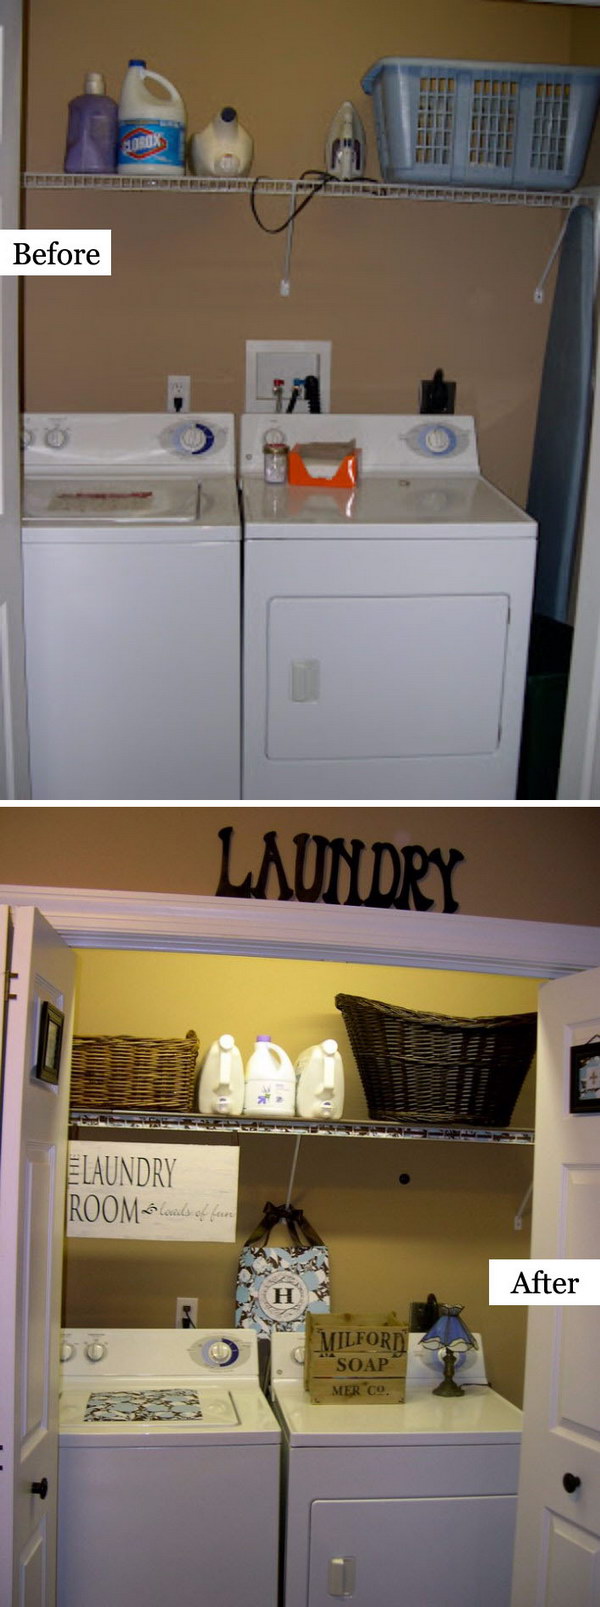 25 Creative Before and After Laundry Room Makeovers to Inspire Your Next Renovation